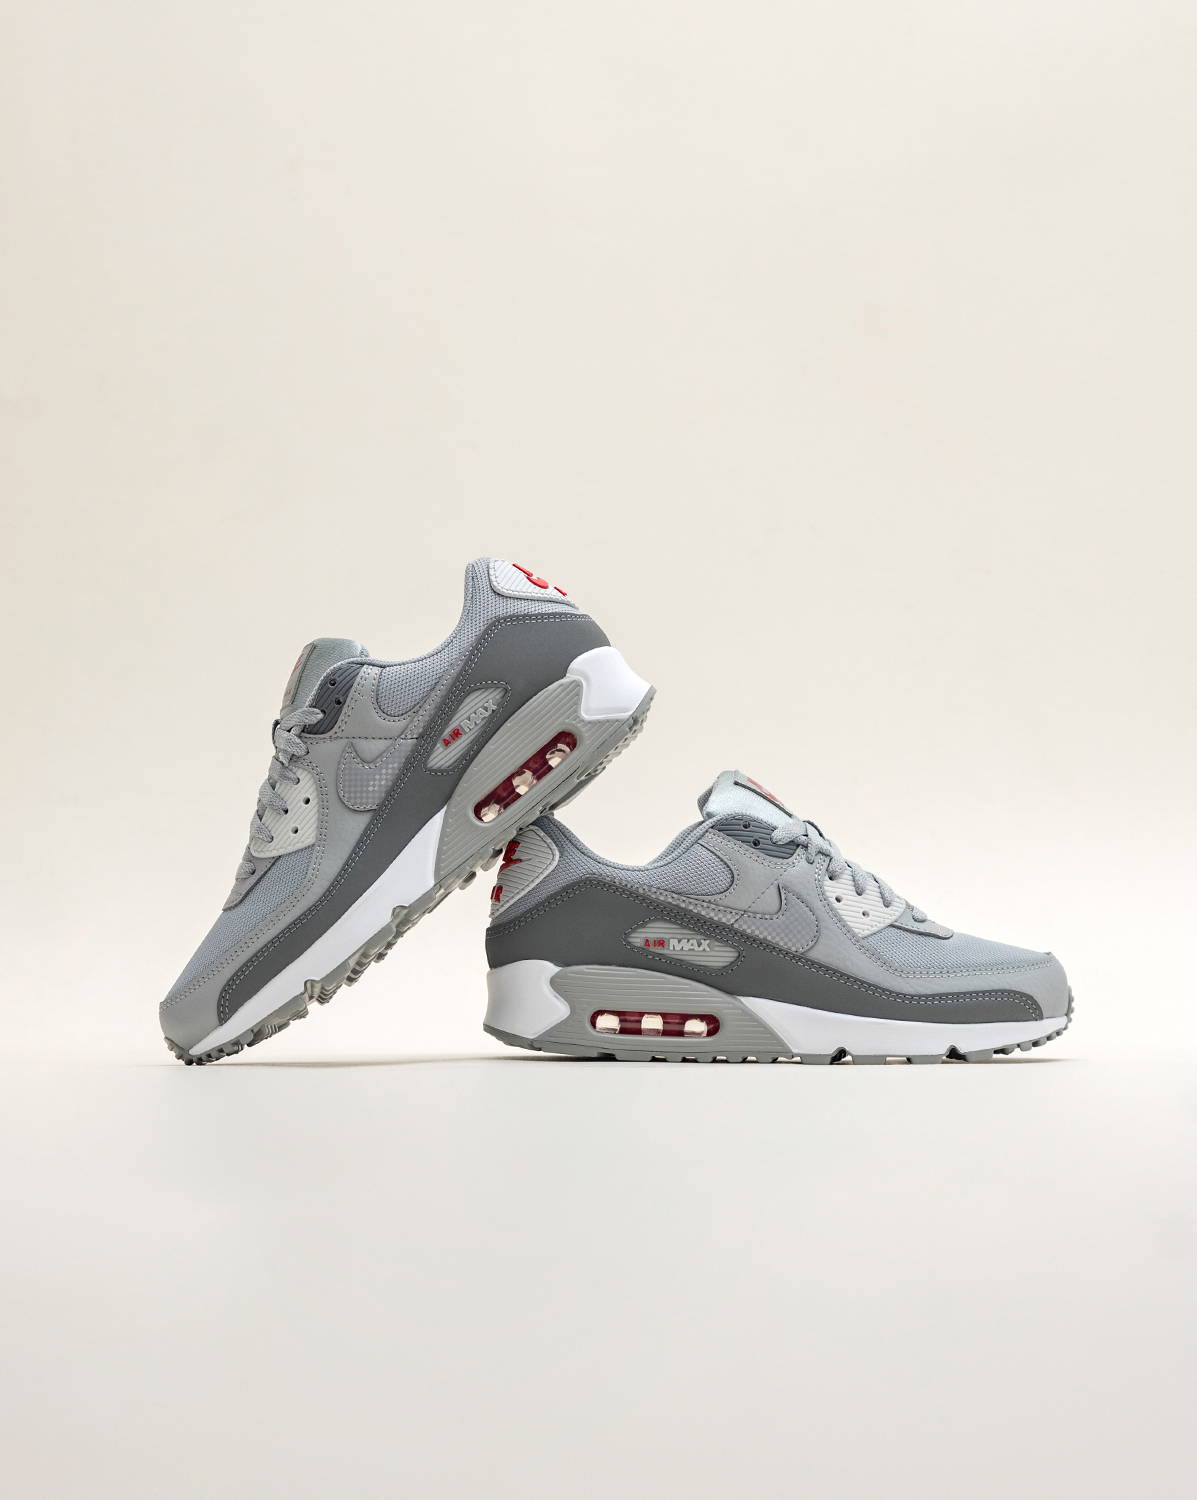 bubbel dramatisch verlangen Nike Air Max - buy online now at CmimarseilleShops! - custom nike air stab  shoes for women clearance